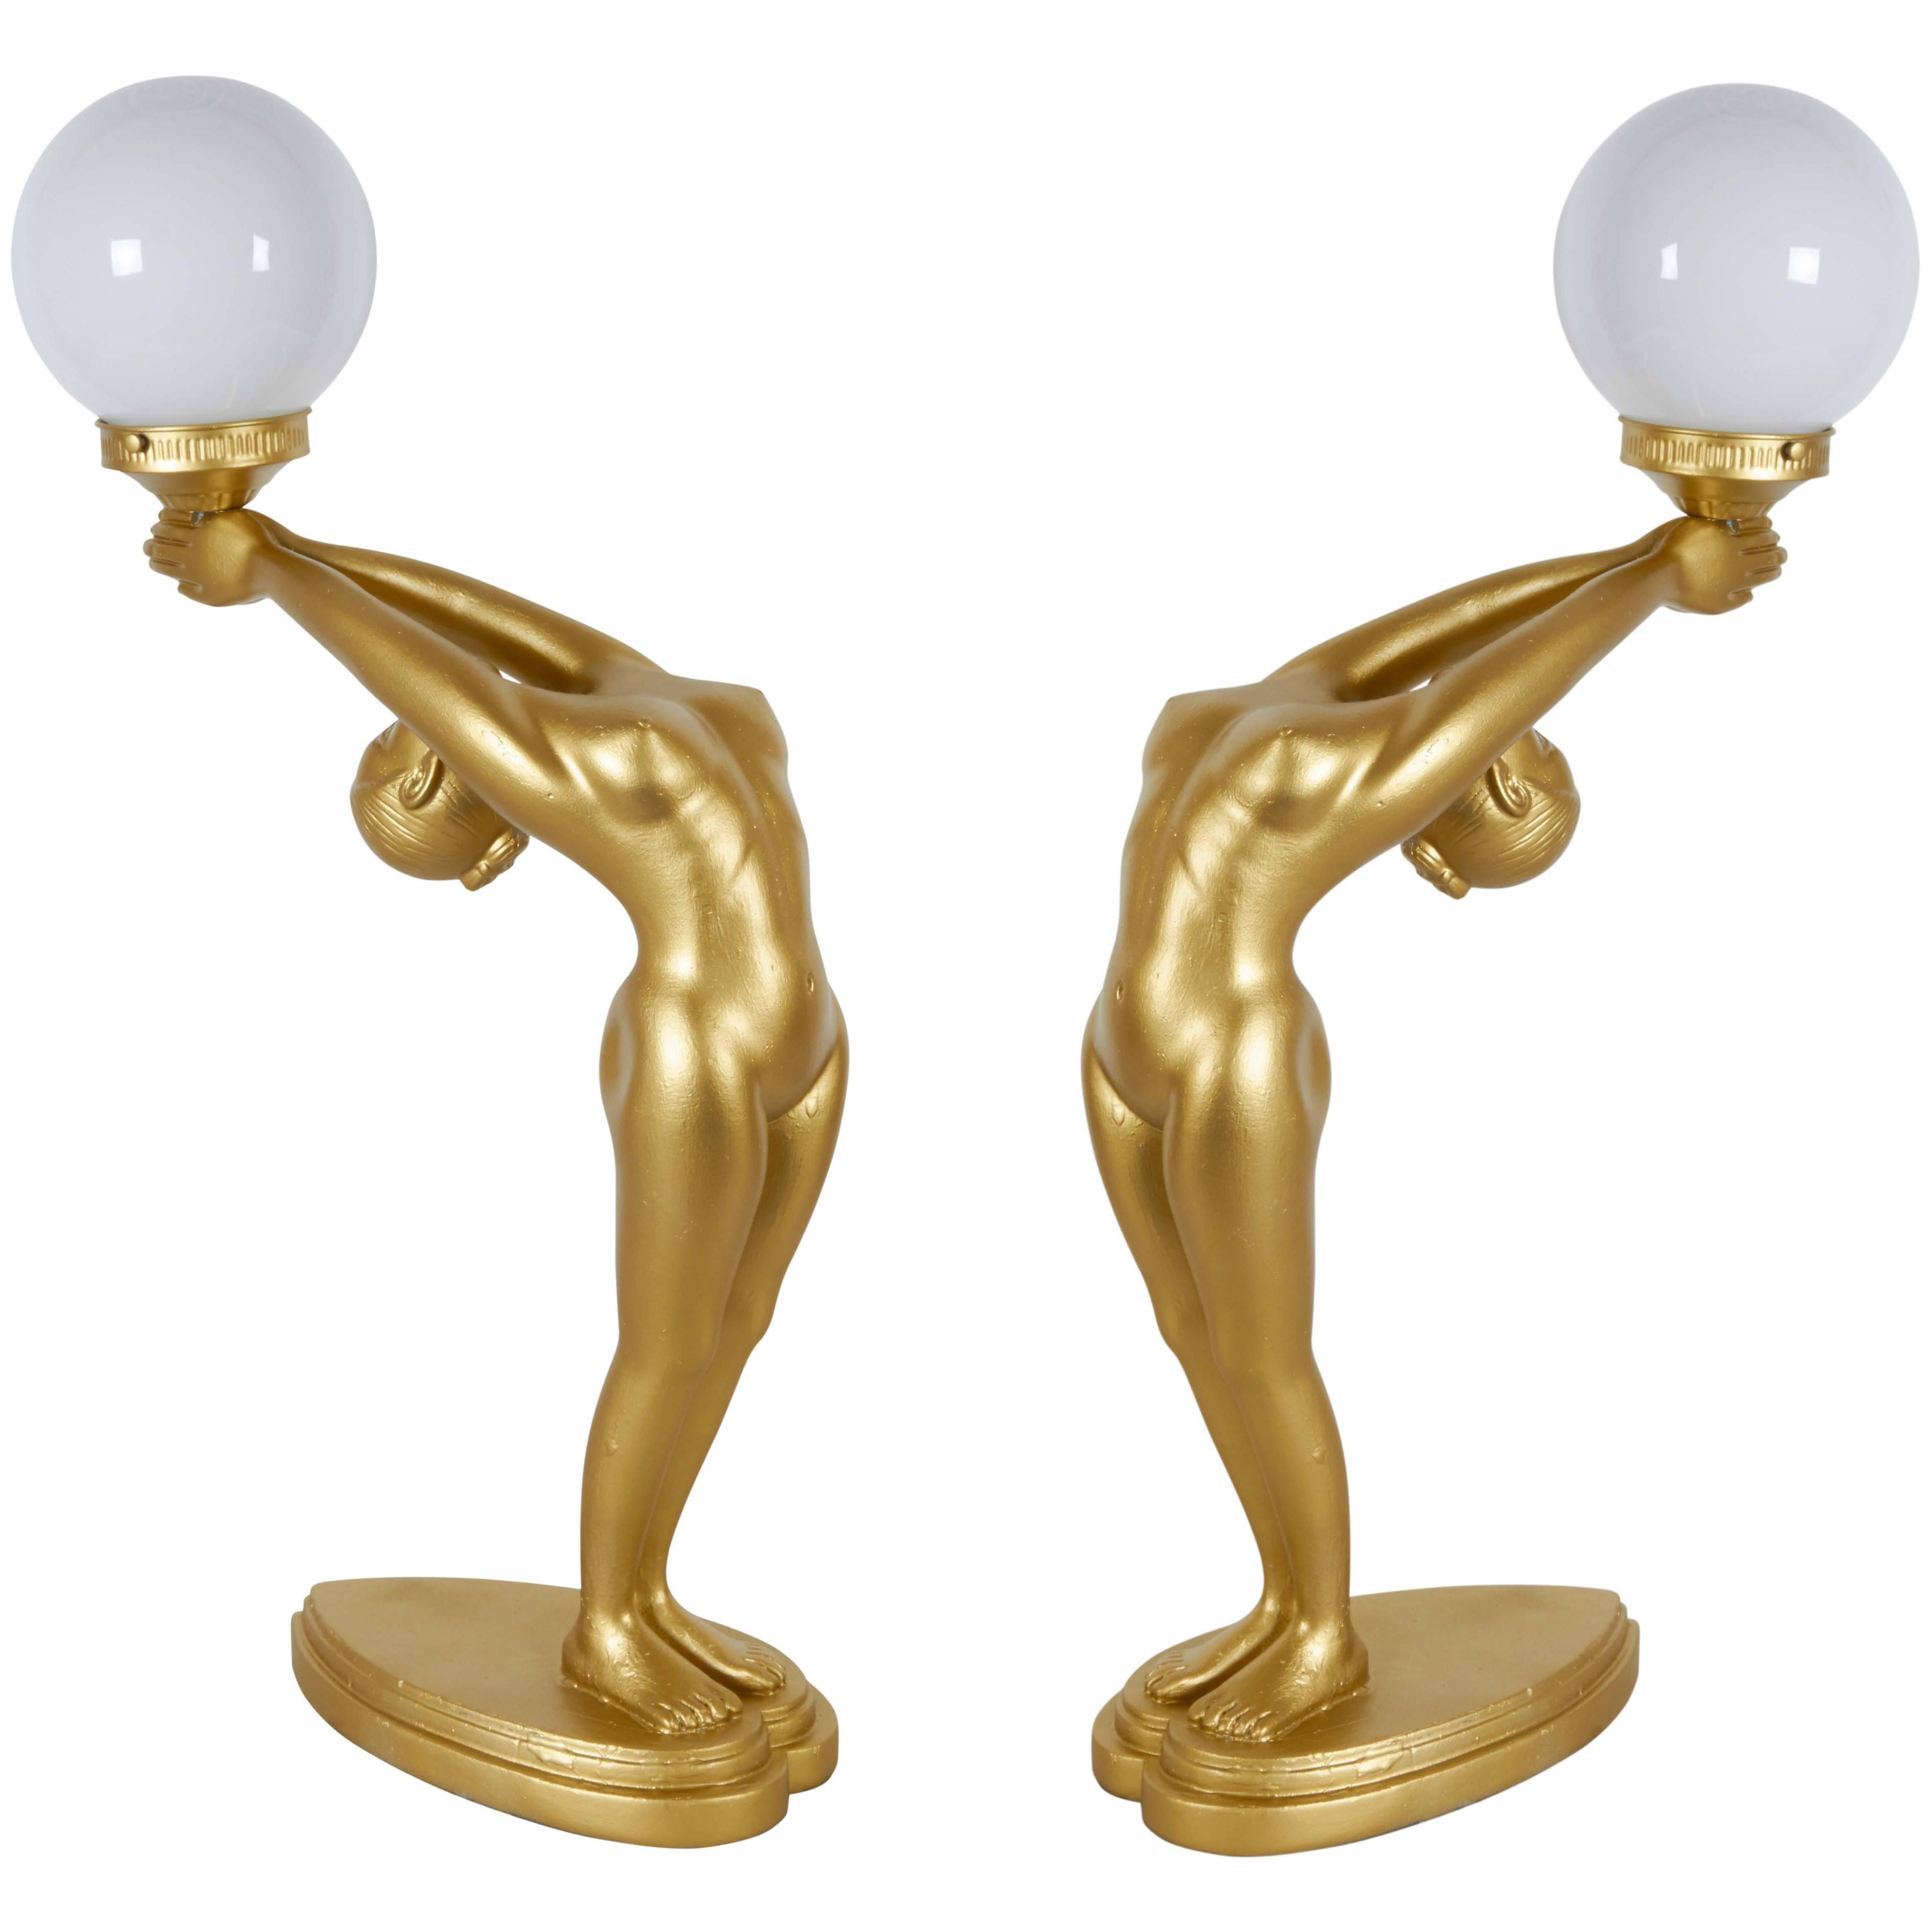 Pair of Figural Art Deco Style Lamps in the Manner of Max Le Verrier